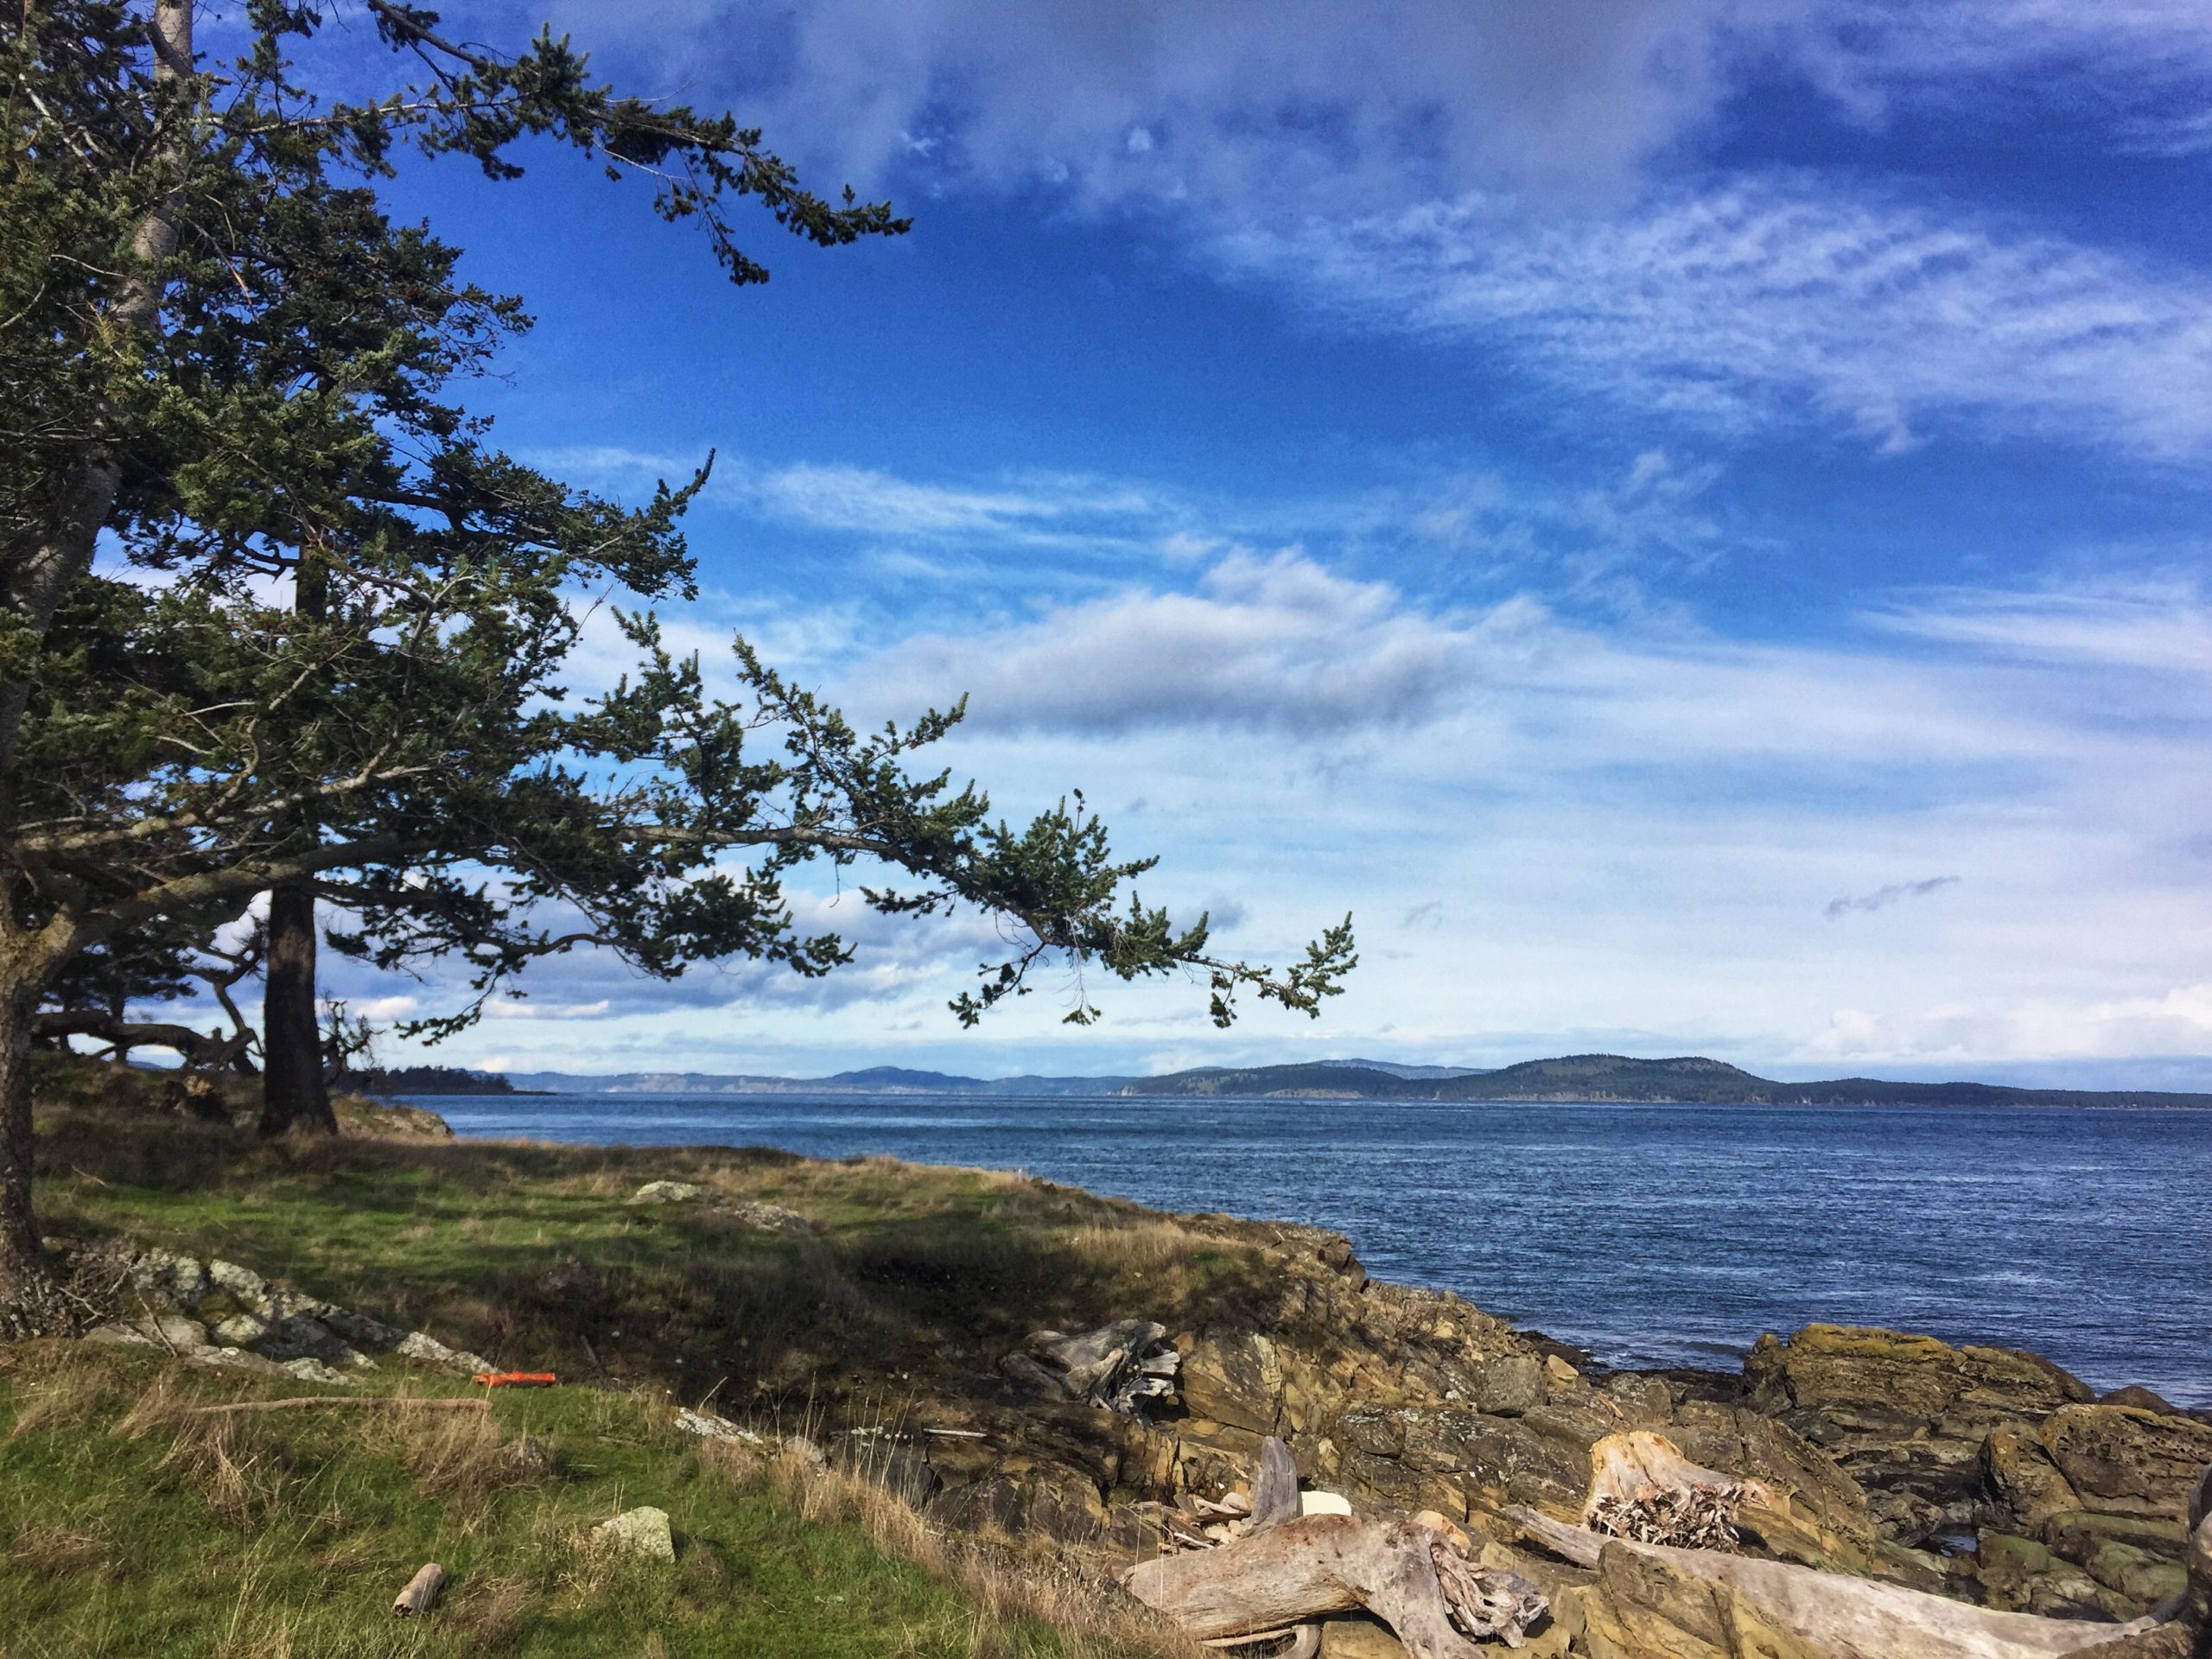 photo of a coastal ocean scene on Sidney Island, looking out over the Southern Gulf Islands of British Columbia. Scene depicts forests, rocky shoreline, and blue Pacific ocean water